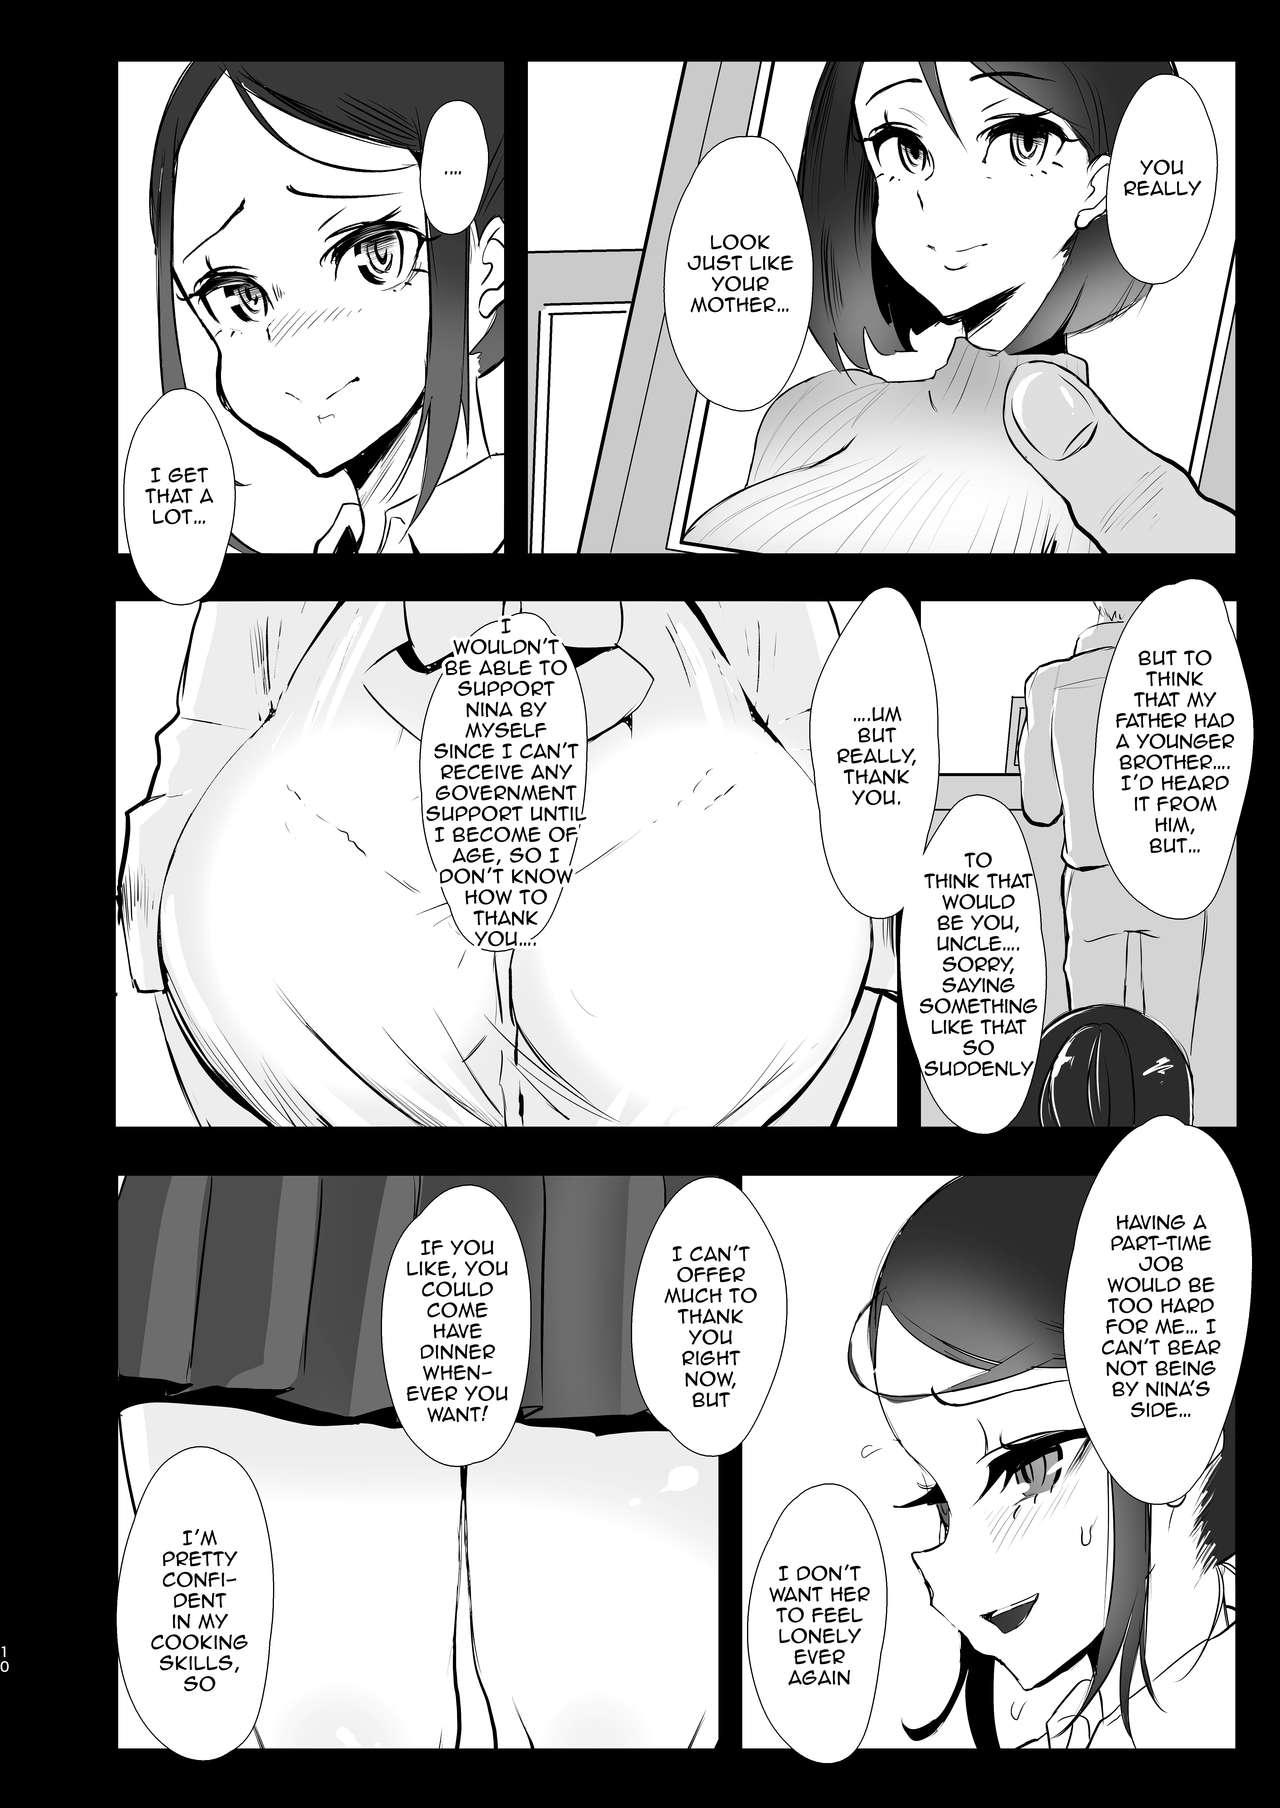 Oral Porn Himawari no Kage | The Other Side of the Sunflower - Original Whore - Page 9